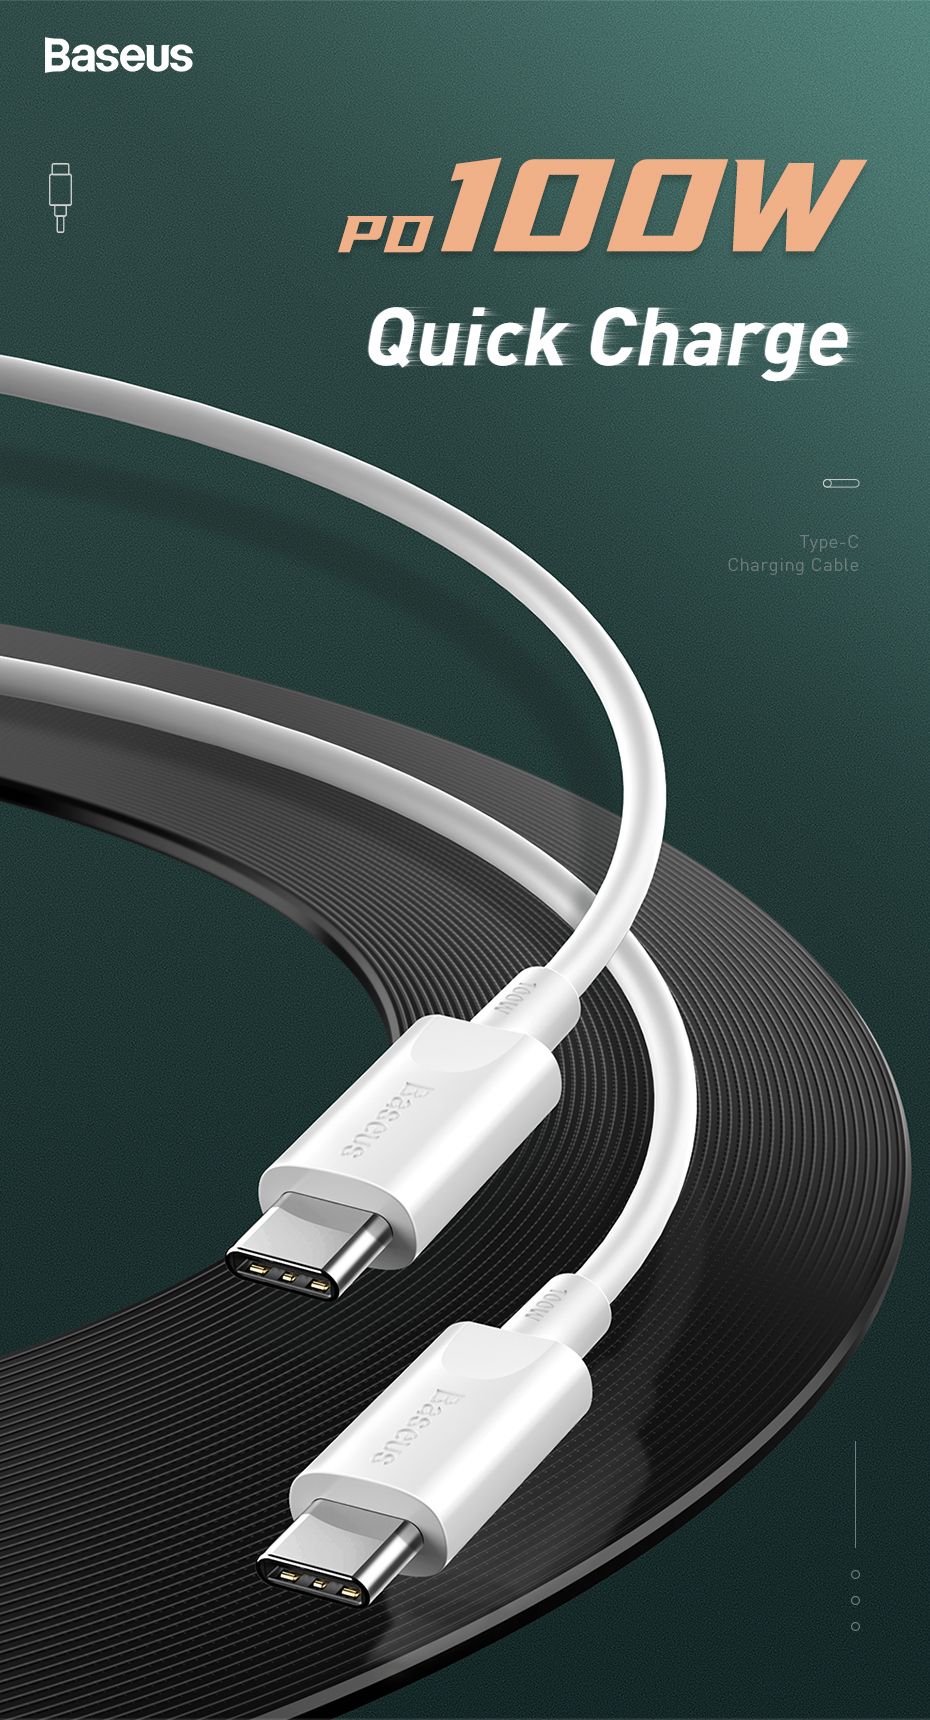 Baseus-15m492ft-100W-5A-PD-USB-C-to-USB-C-Cable-PD-30-QC-30-FCP-Fast-Charging-Data-Sync-Cable-Cord-F-1691948